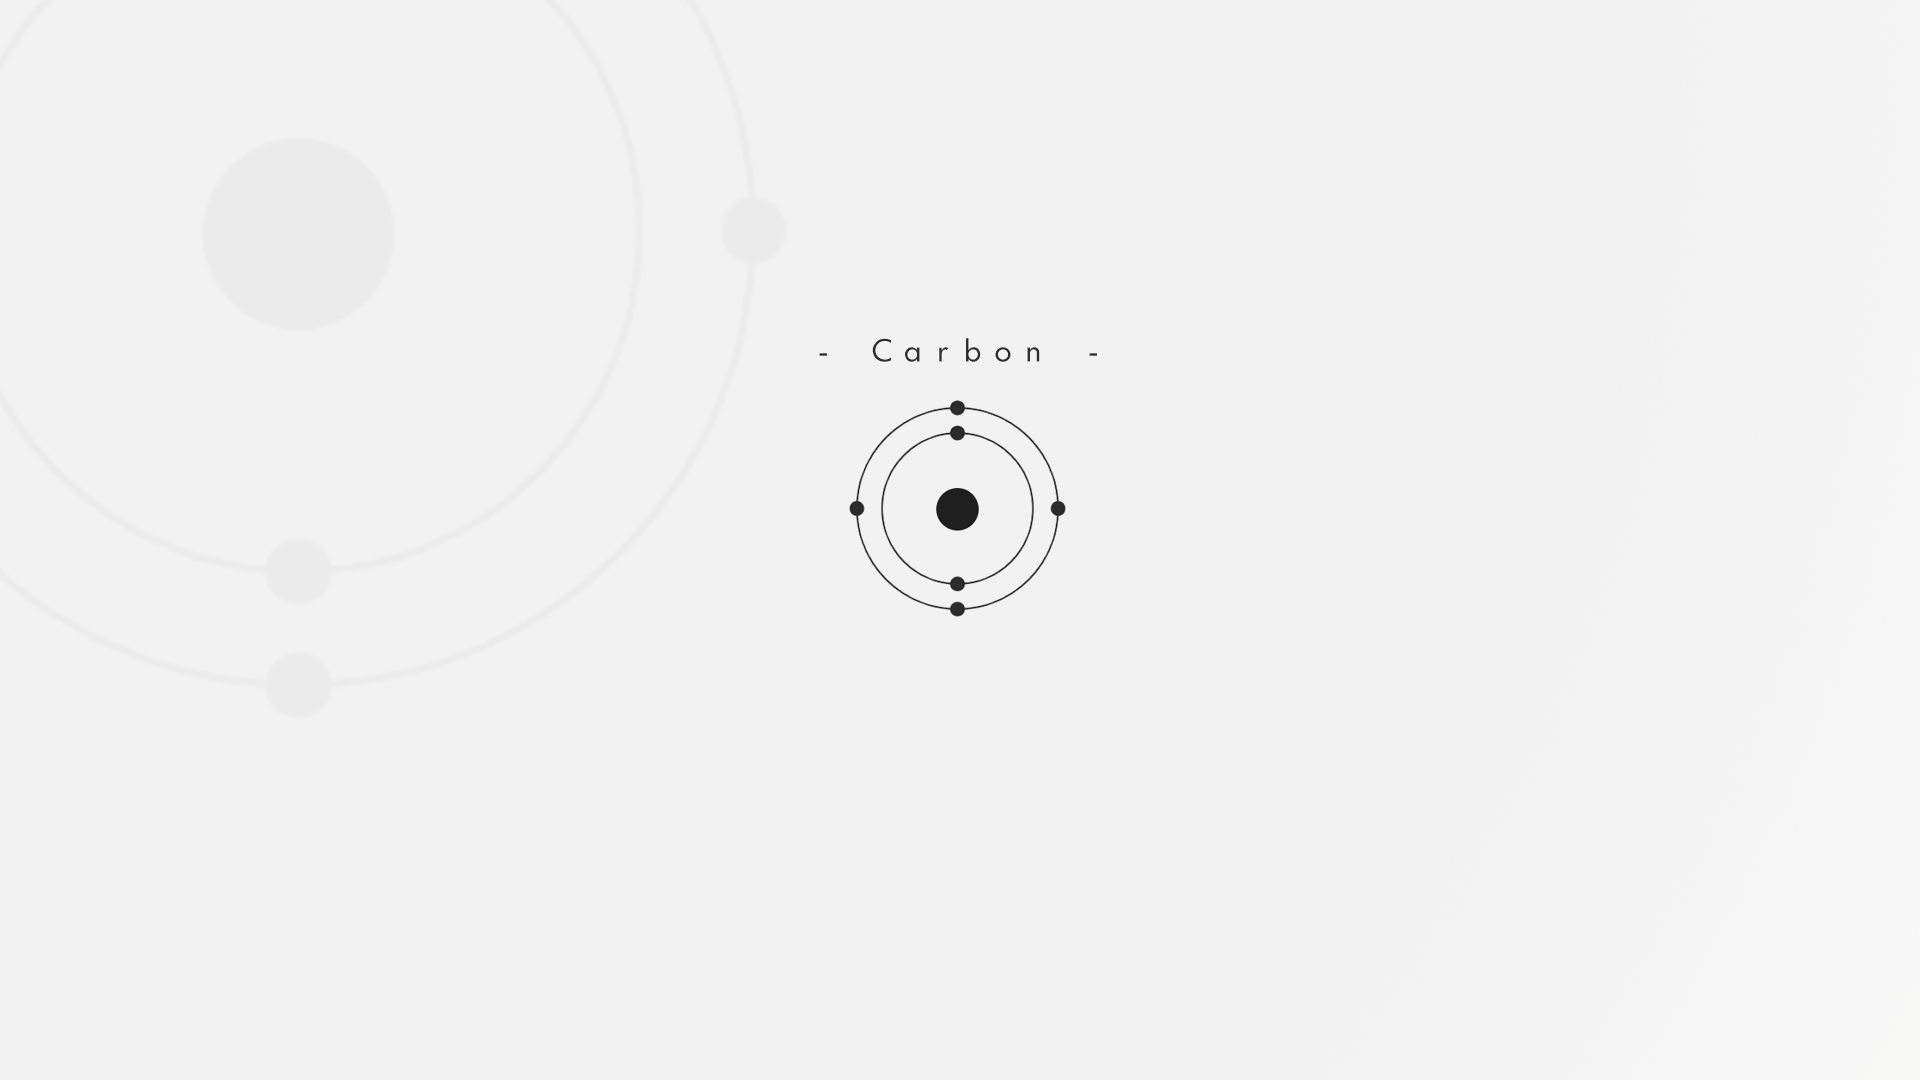 Minimalist Carbon wallpaper I quickly threw together